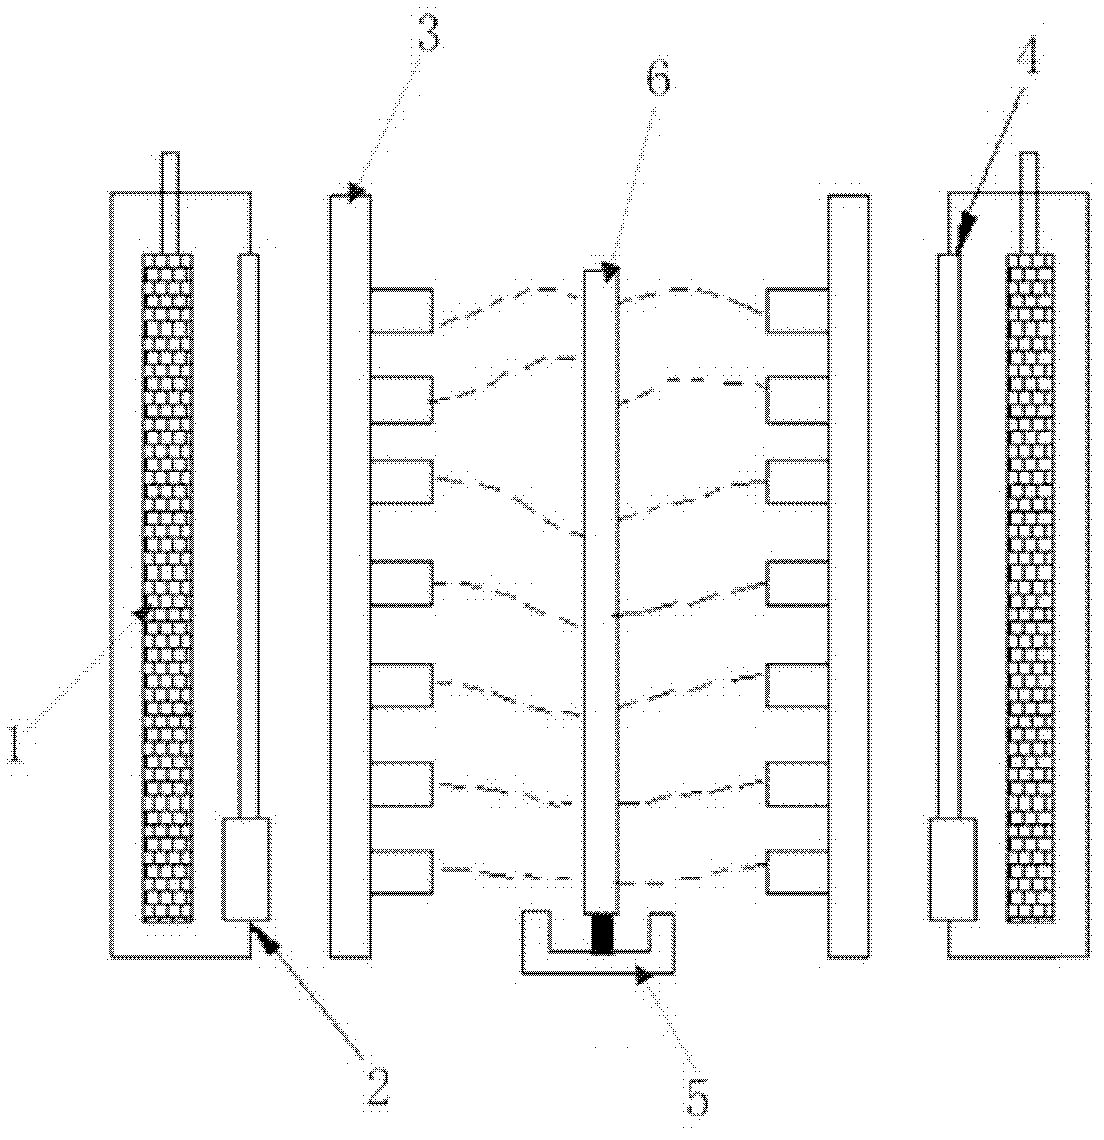 Forming process for fine line circuit with line width being below 0.05mm of flexible printed circuit board